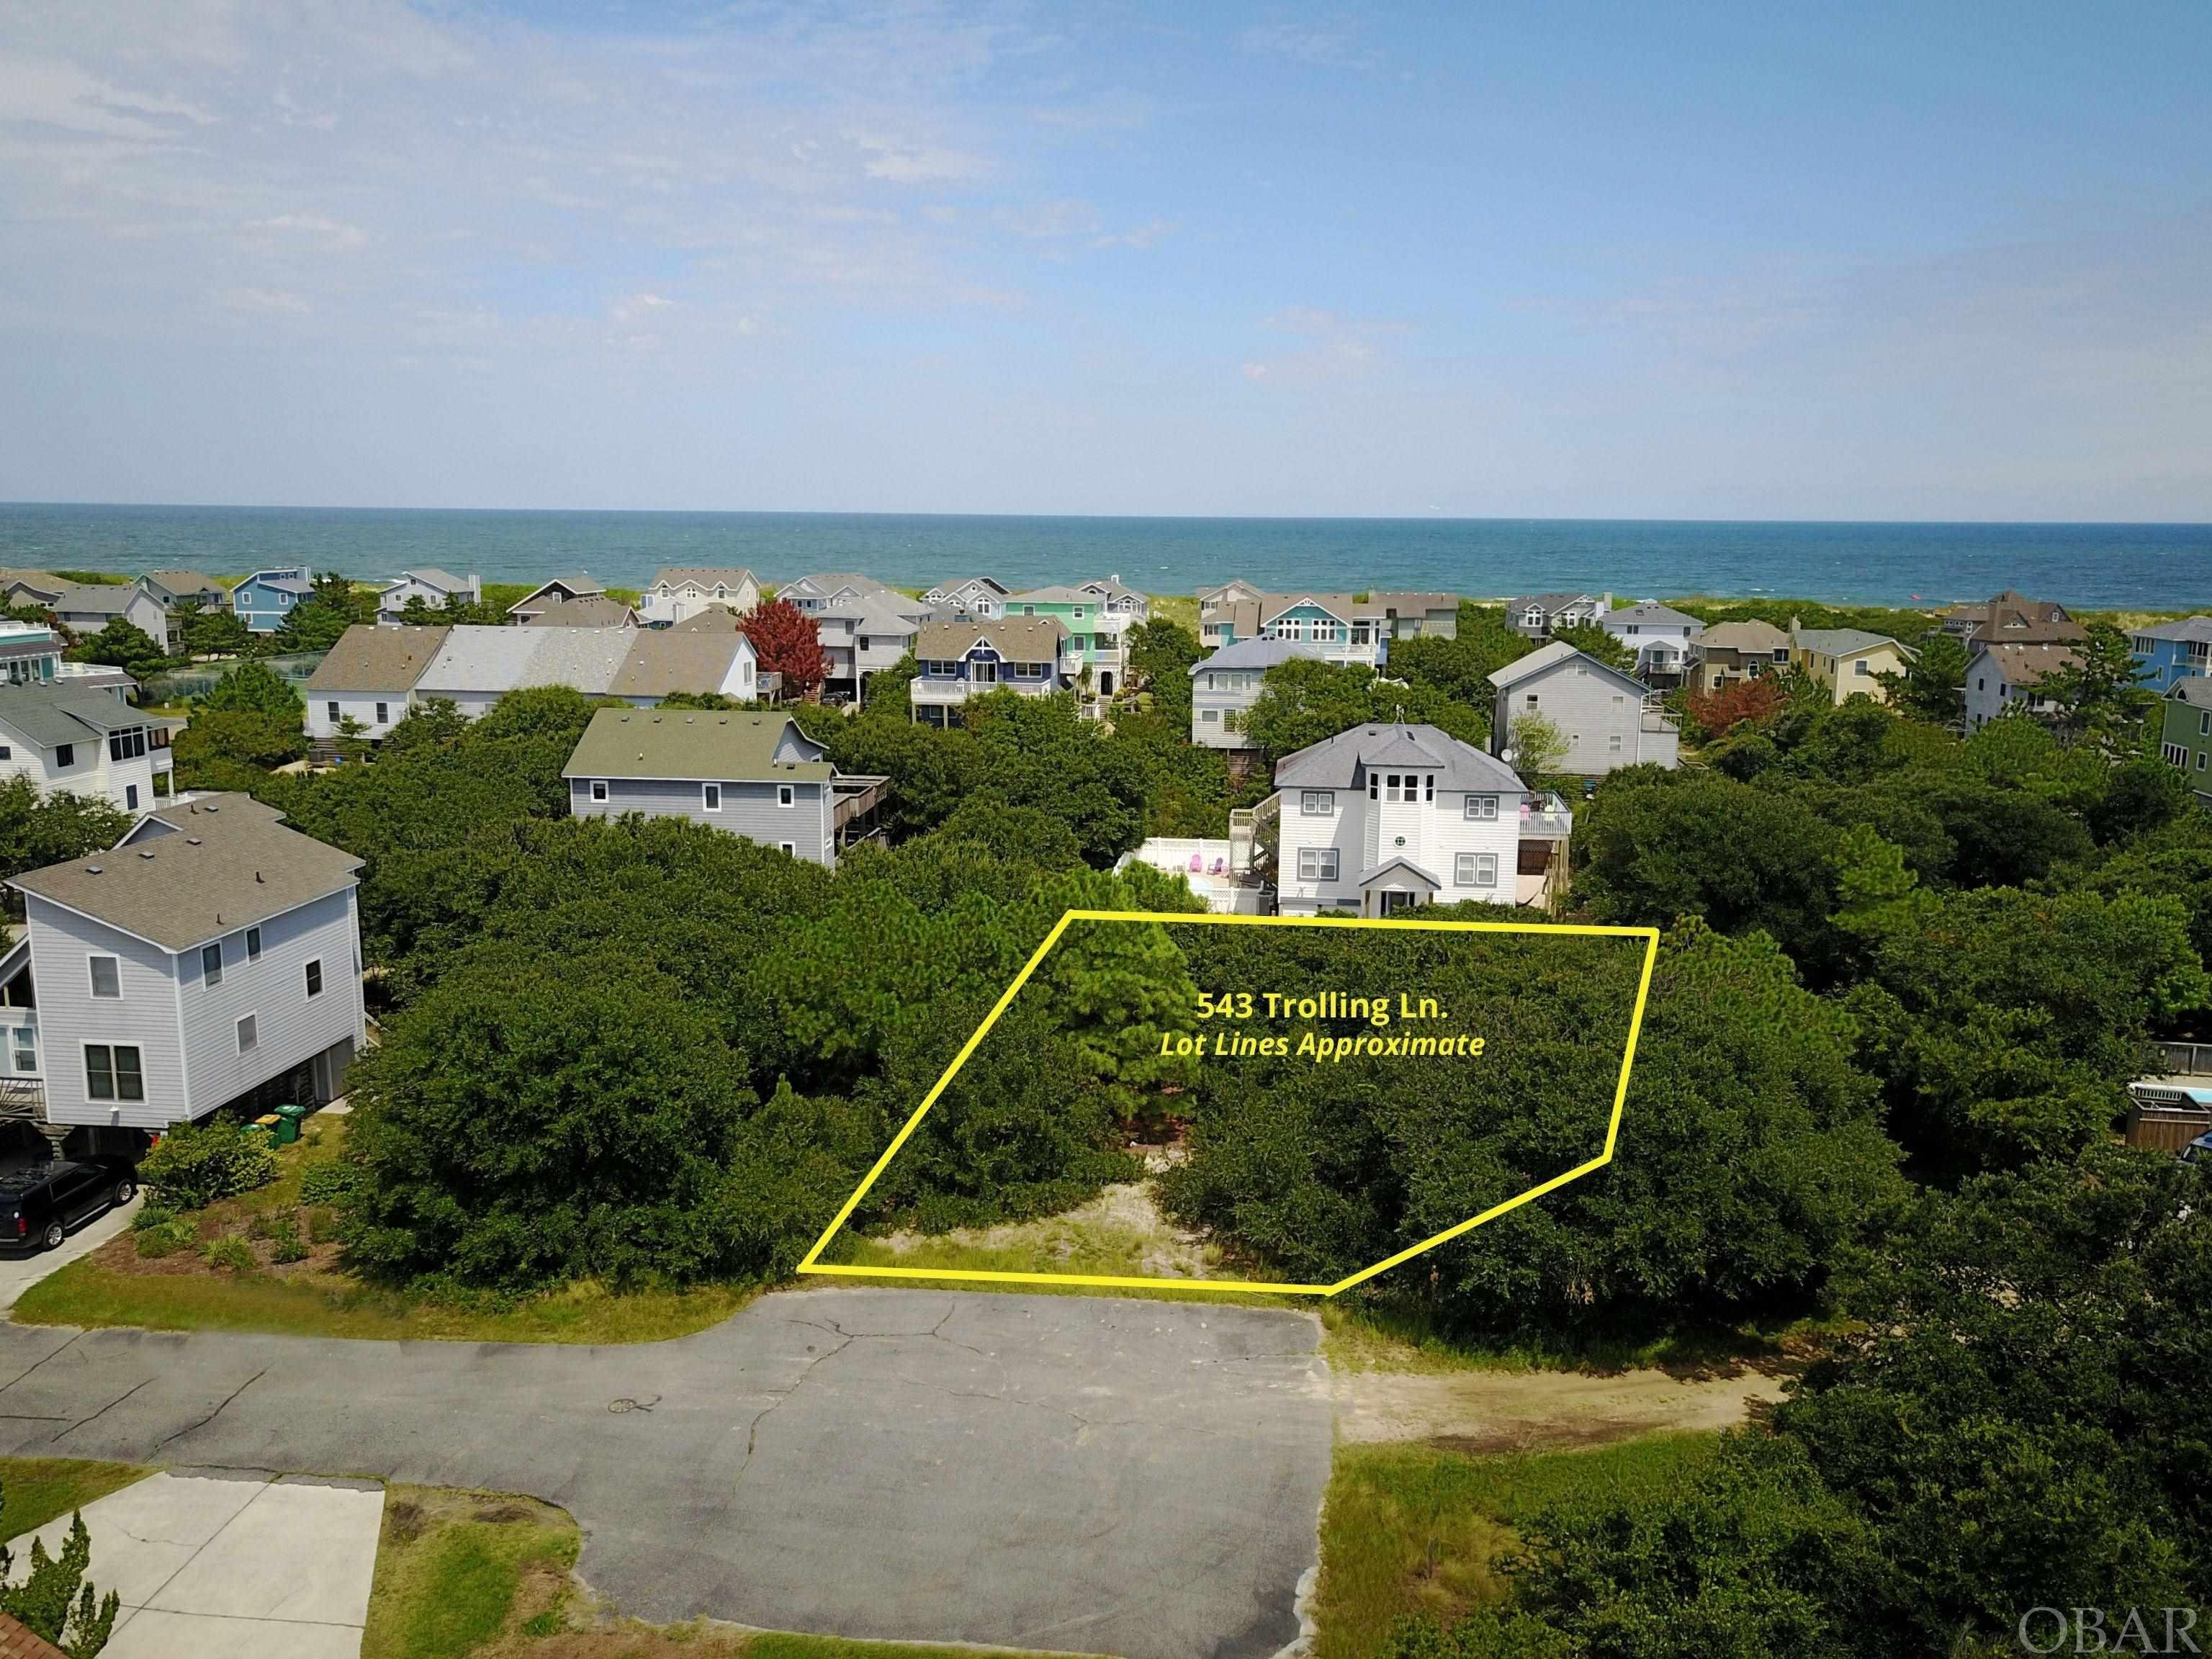 Build the home of your dreams on this fantastic lot!  Tucked away in a cul-de-sac in Section D, this Ocean Sands lot gives you the perfect blank canvas to create your dream.  Community tennis courts are available just down the street and the ocean is a stone's throw away. Section D is close to Harris Teeter grocery store, restaurants, and The Currituck Club golf course. Or jump on the pedestrian/bike path and explore north to Timbuck II and beyond. Centrally located and easy stroll to the beach - the perfect spot to settle!